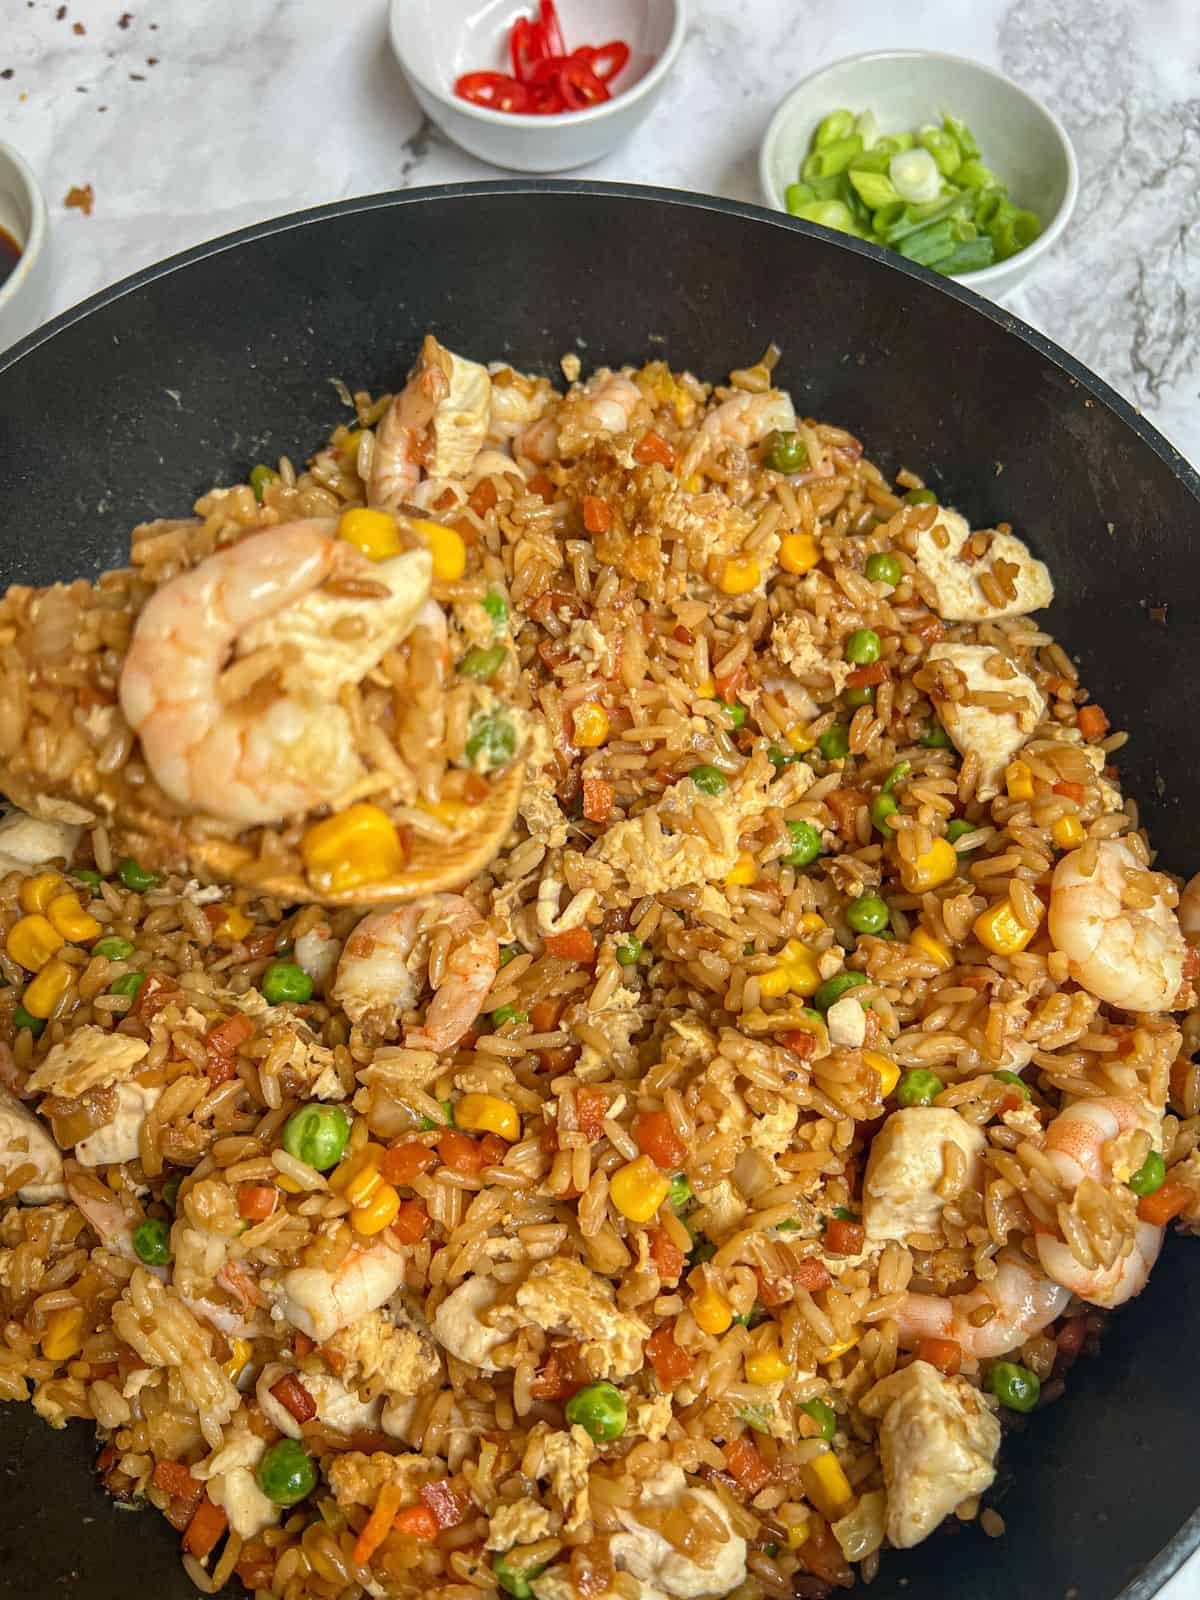 Chicken and shrimp fried rice in a wok with little bowls of chilli and spring onion on the side.